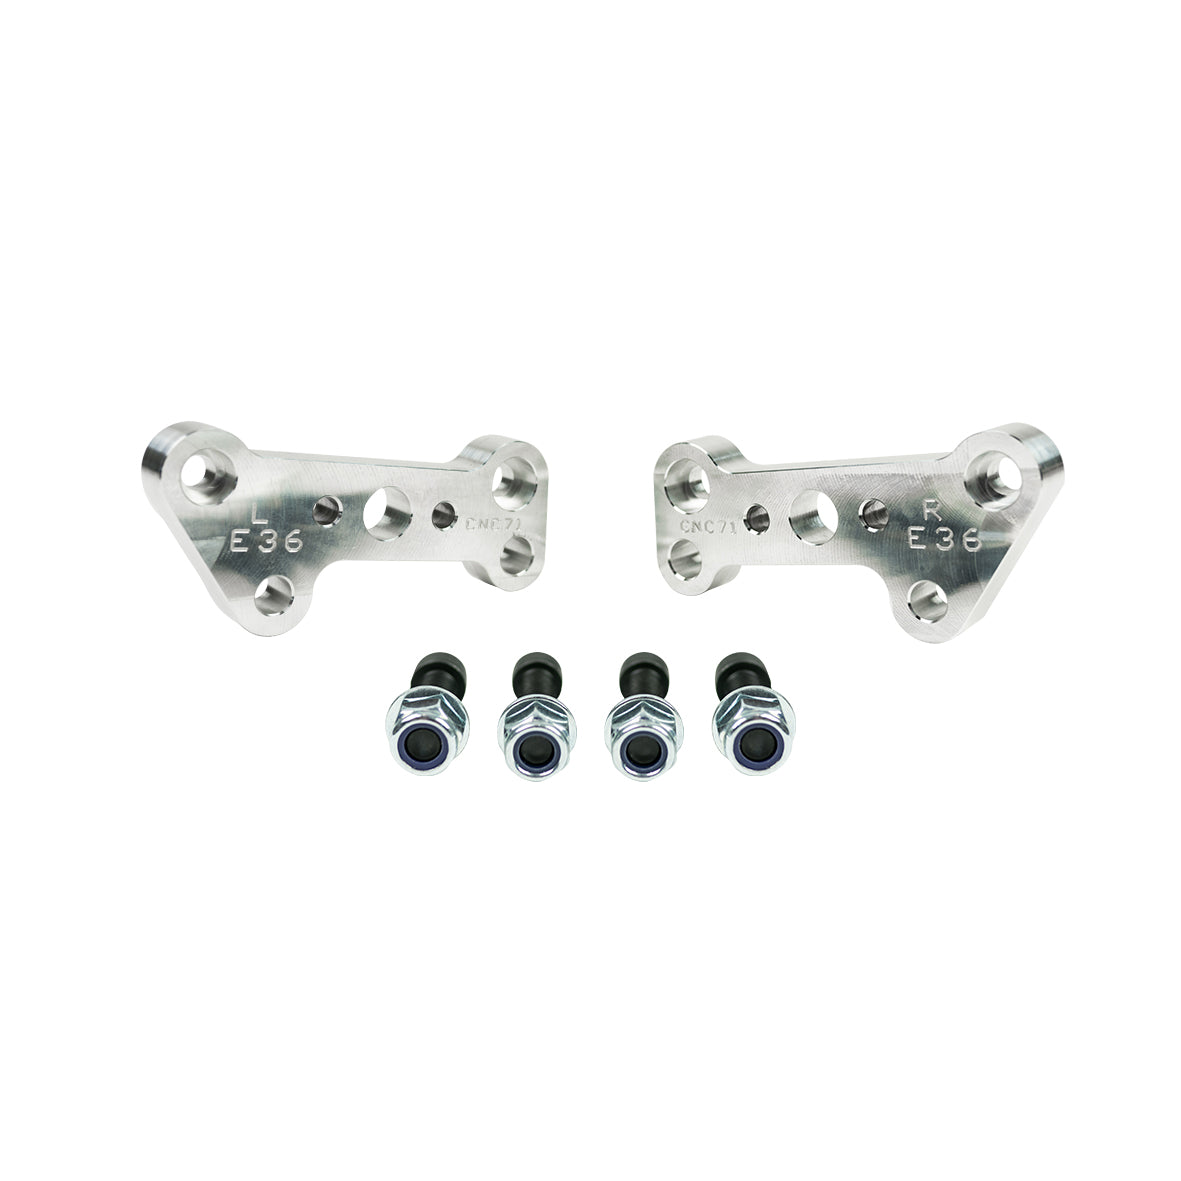 CNC71 - DRIFT ADAPTERS FOR BMW E36 - STOCK ARM